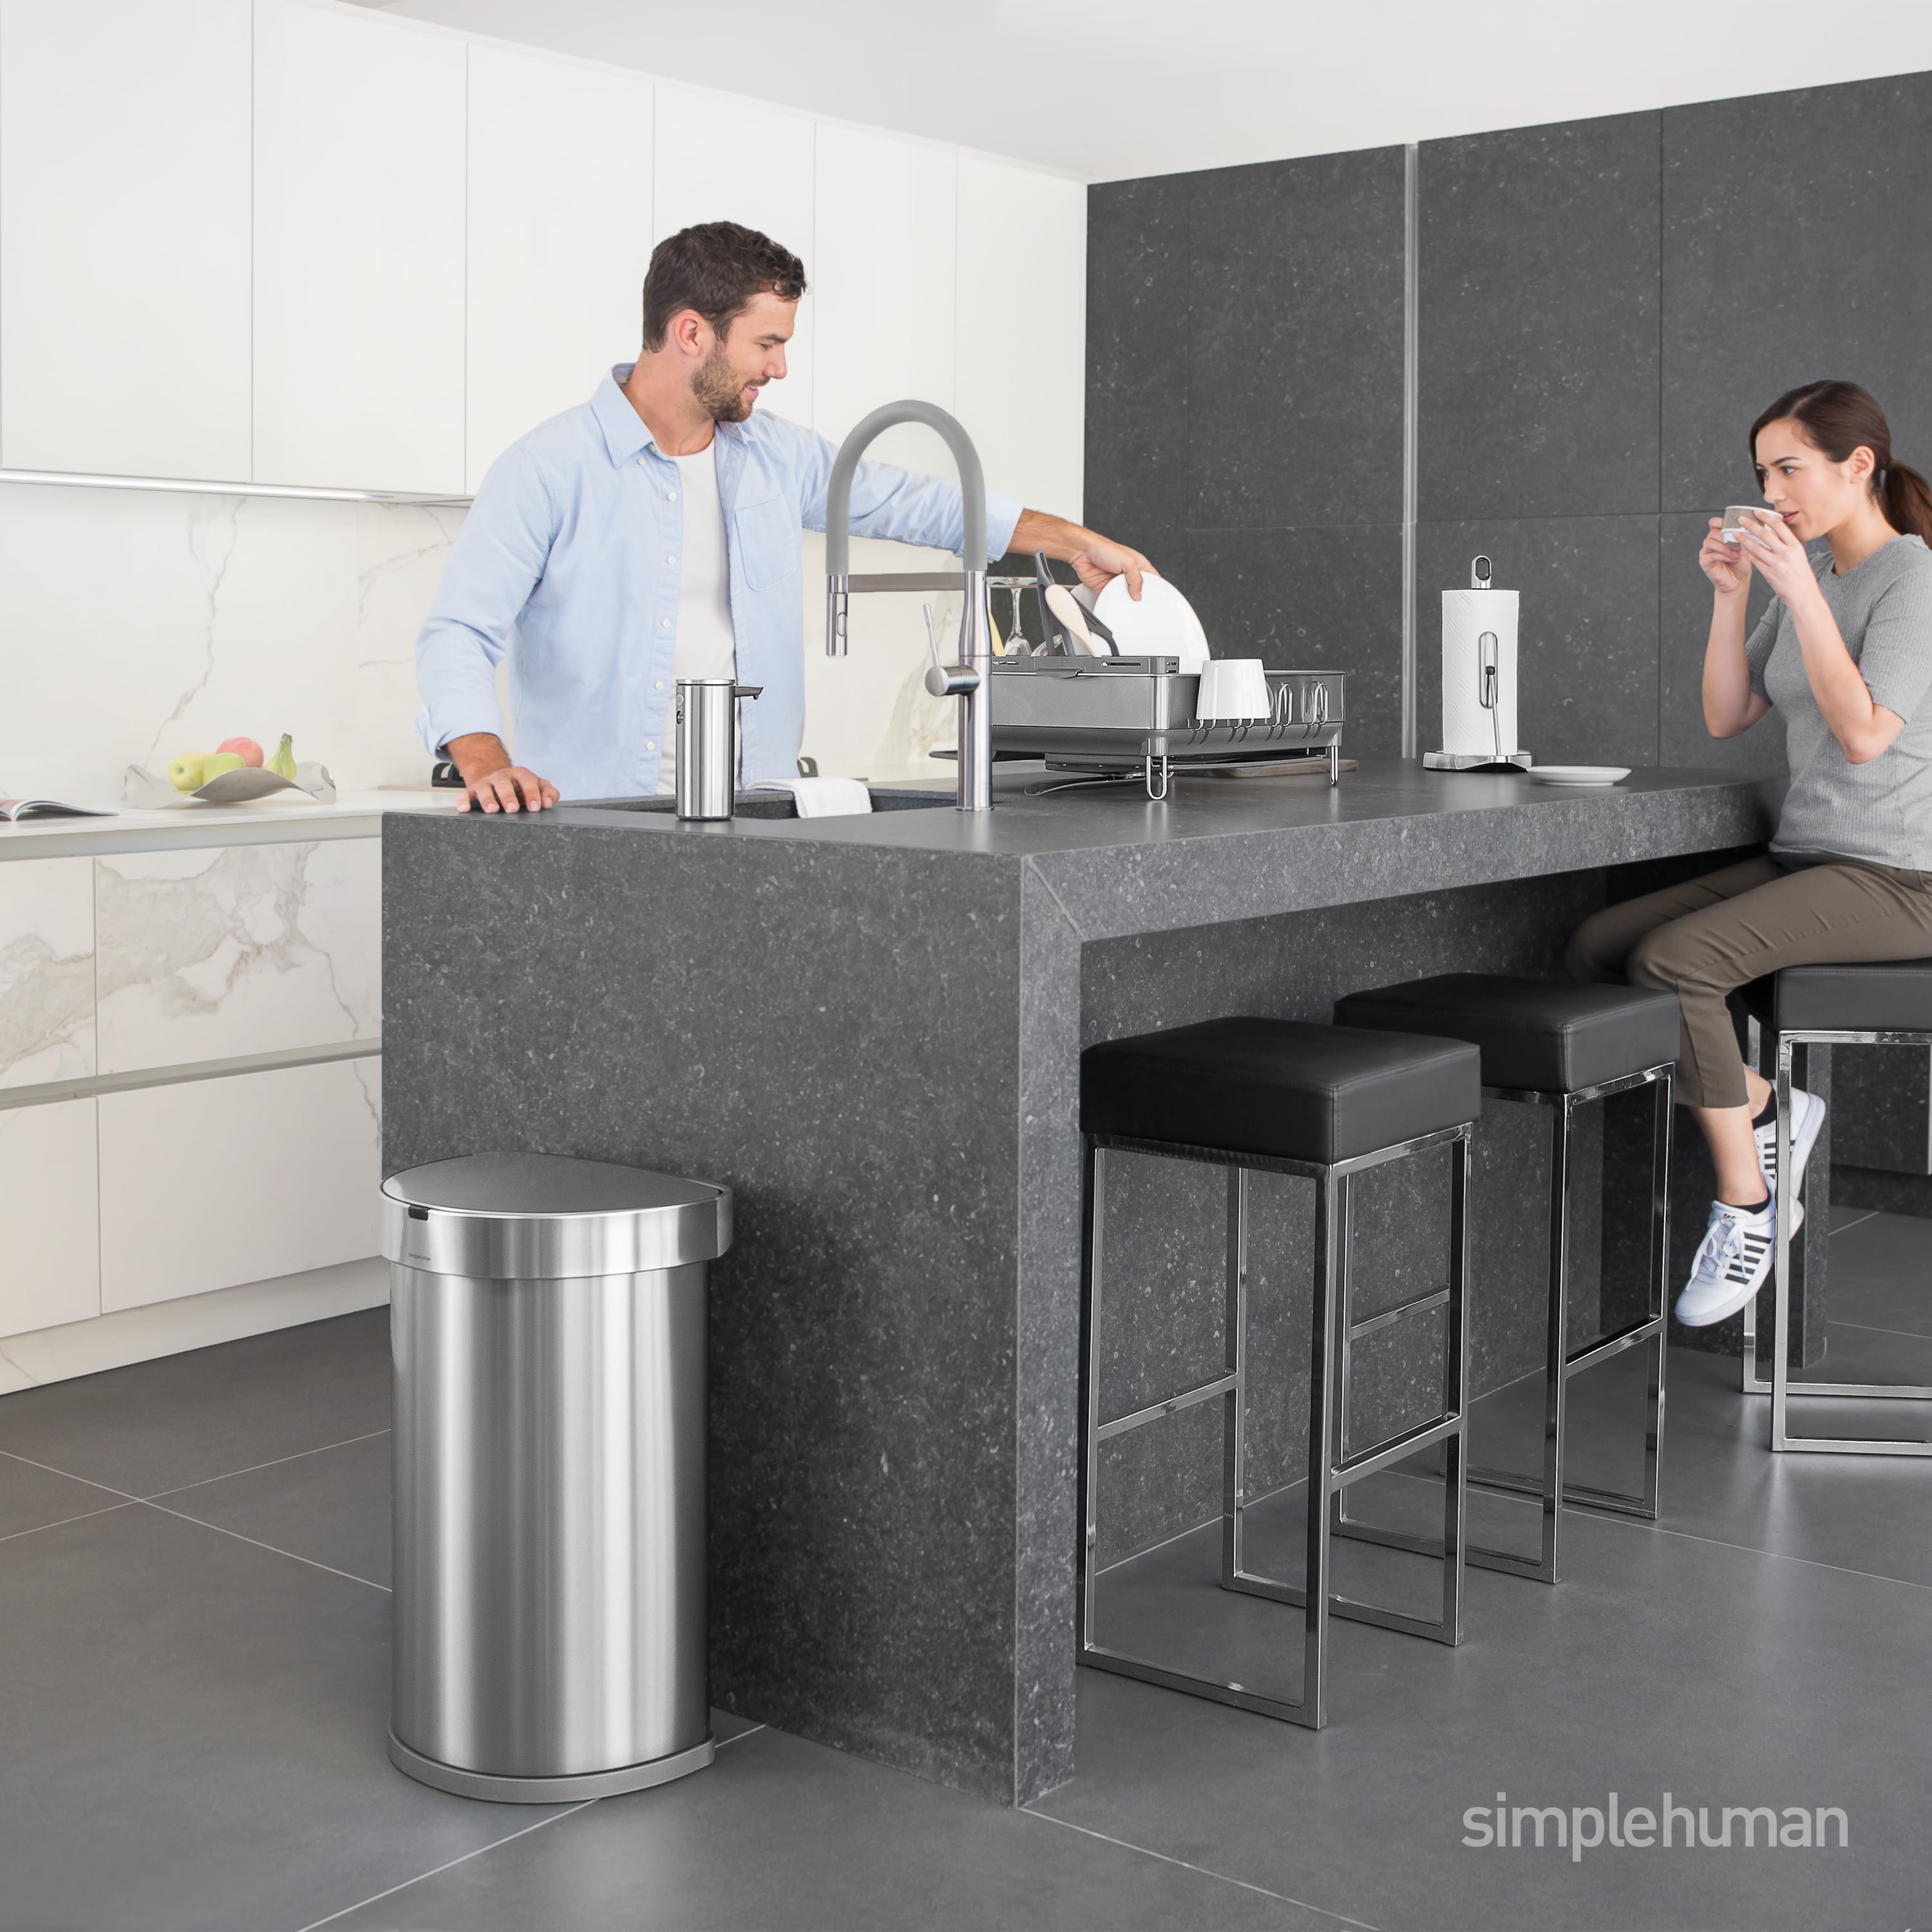 simplehuman 45-Liter Fingerprint-Proof Brushed Stainless Steel Semi-Round  Metal Household Trash Can CW2030 - The Home Depot